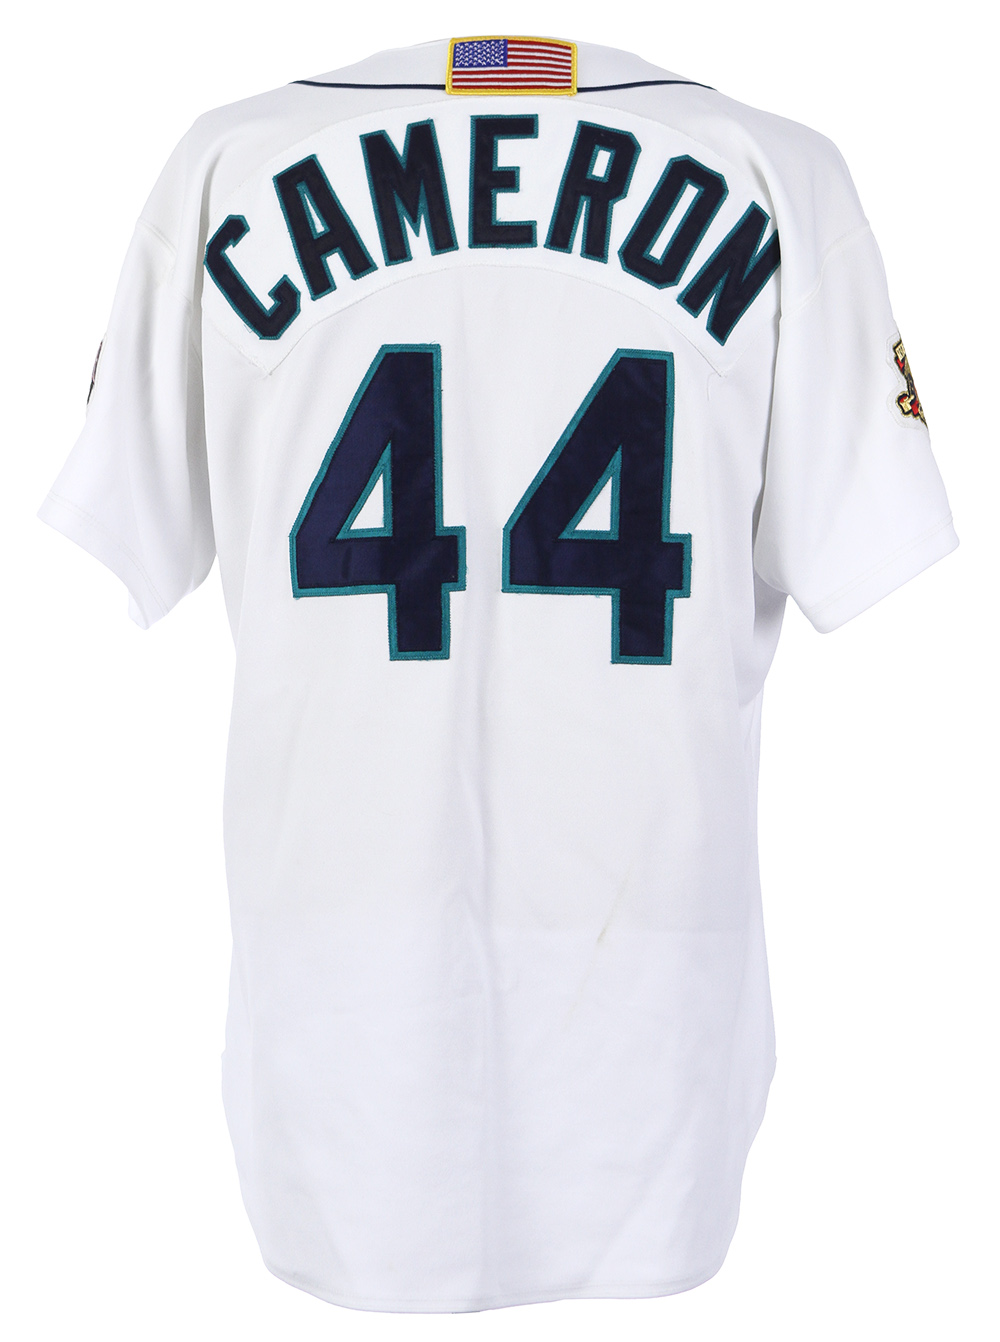 mike cameron mariners jersey